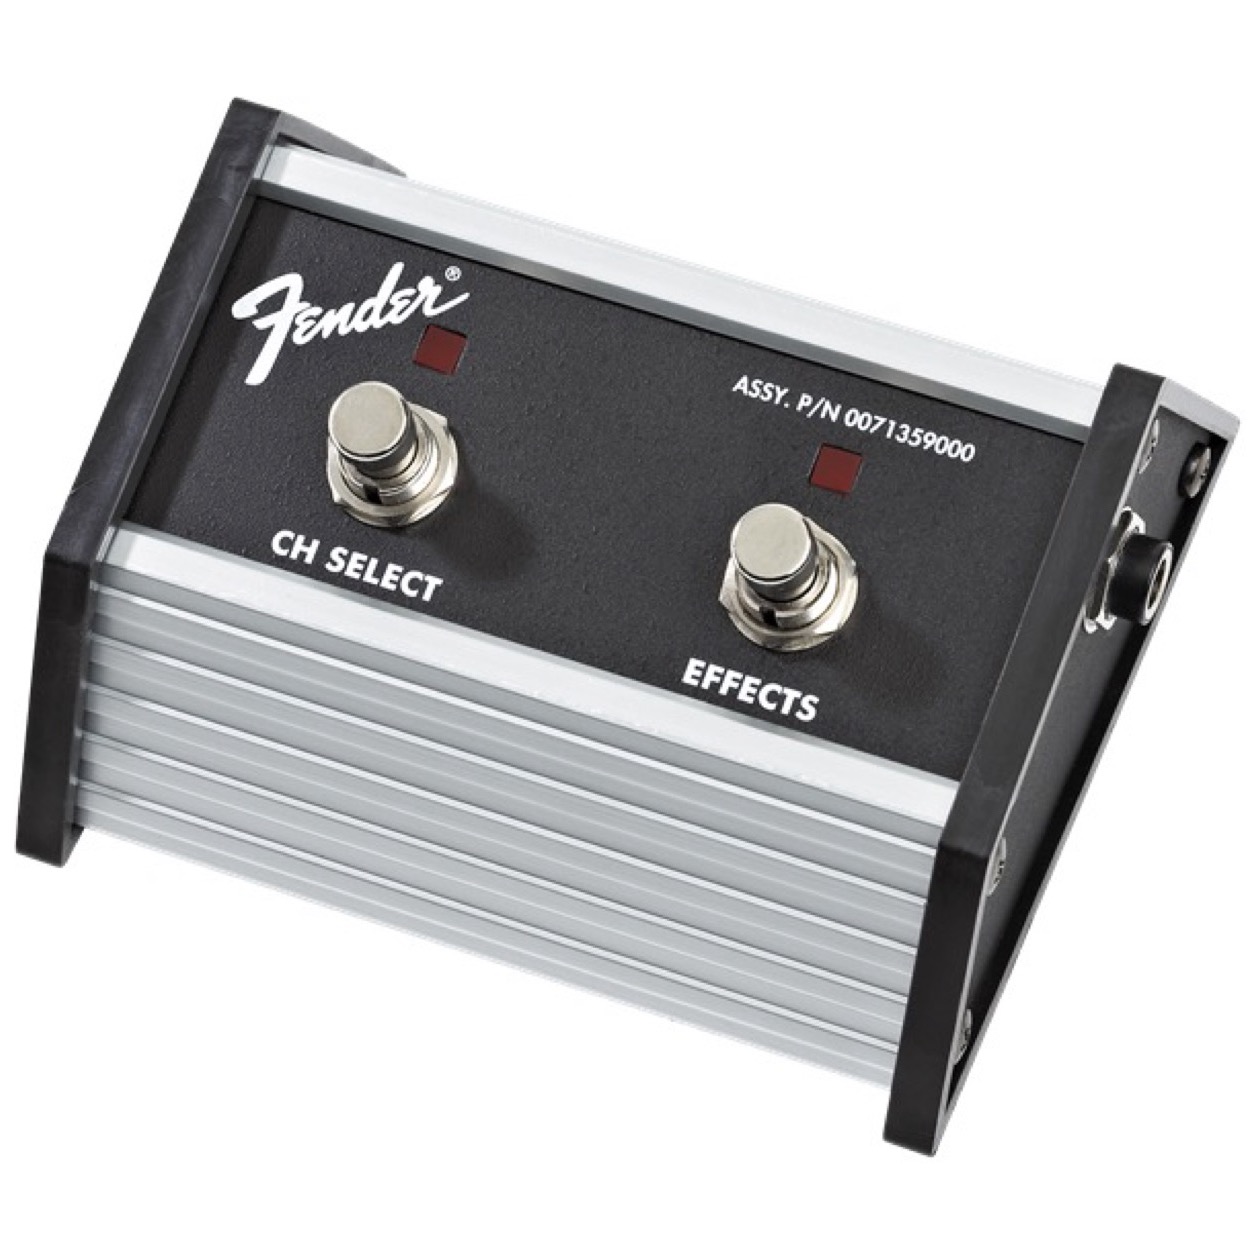 Fender 2-Button Footswitch: Channel Select / Effects On/Off with 1/4" Jack, Model 0071359000